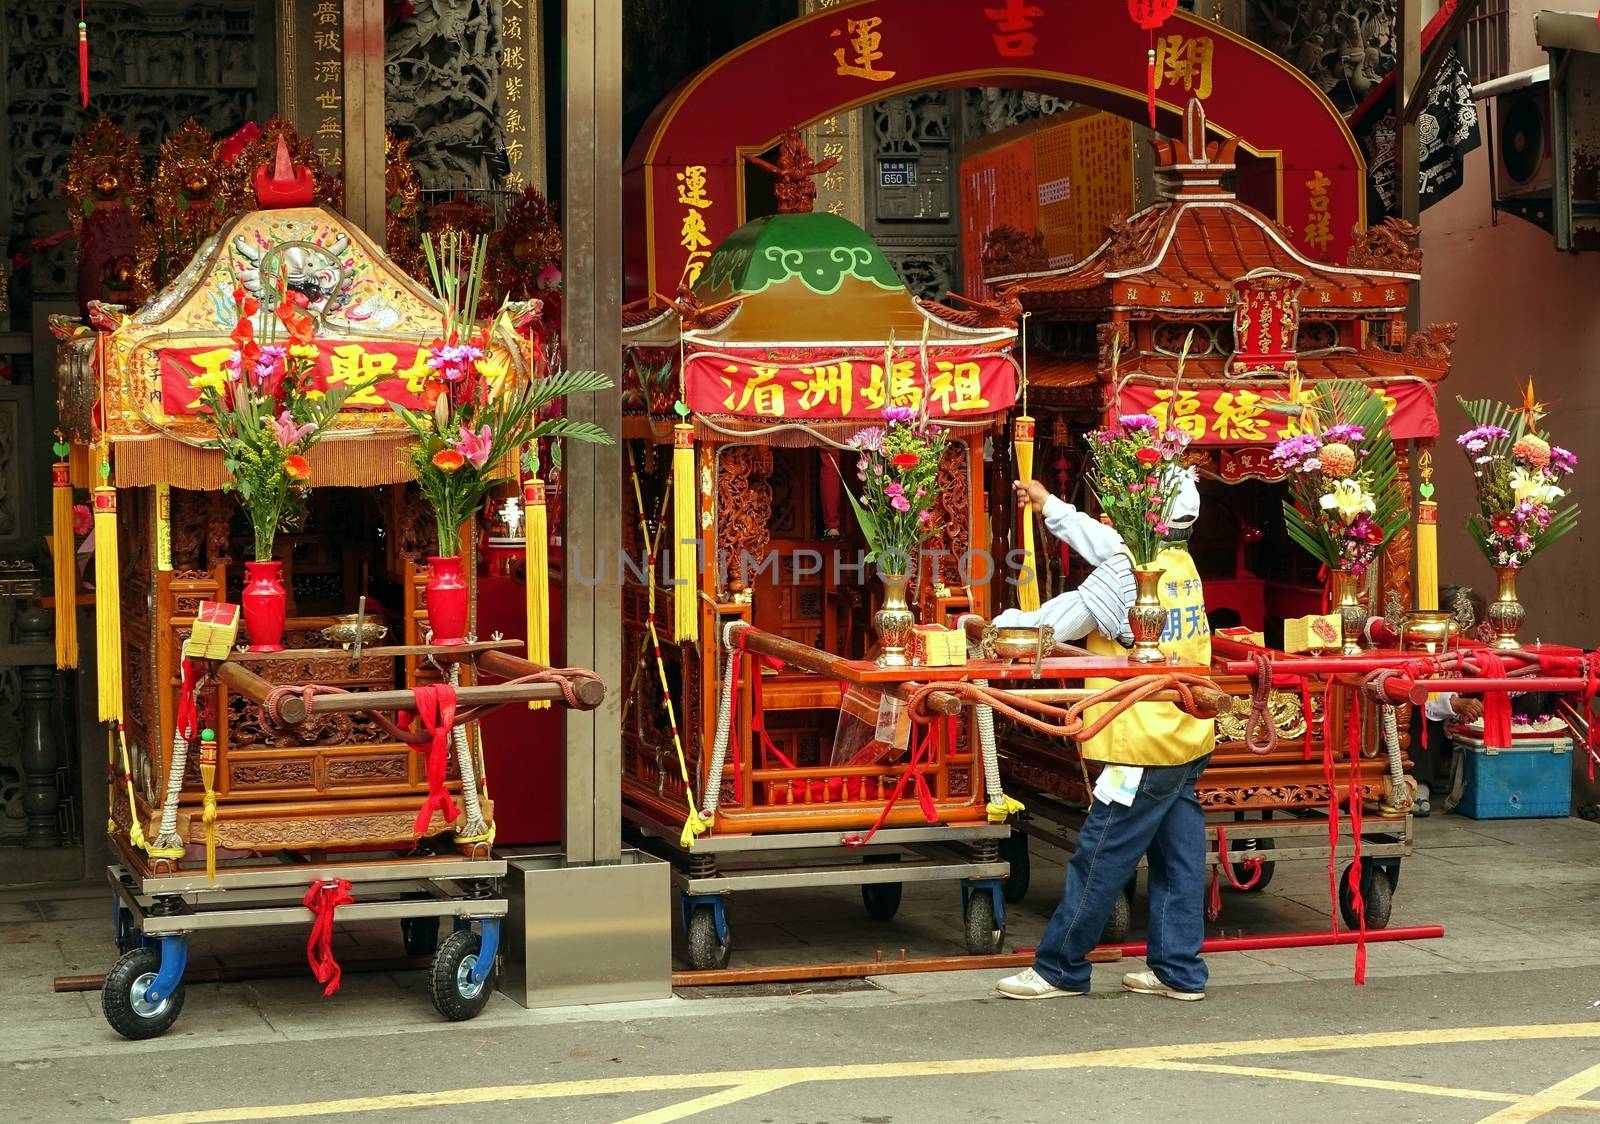 KAOHSIUNG, TAIWAN -- APRIL 19, 2014: Three sedan chairs which contain religious objects are being prepared for a ceremony in honor of the goddess Matsu.